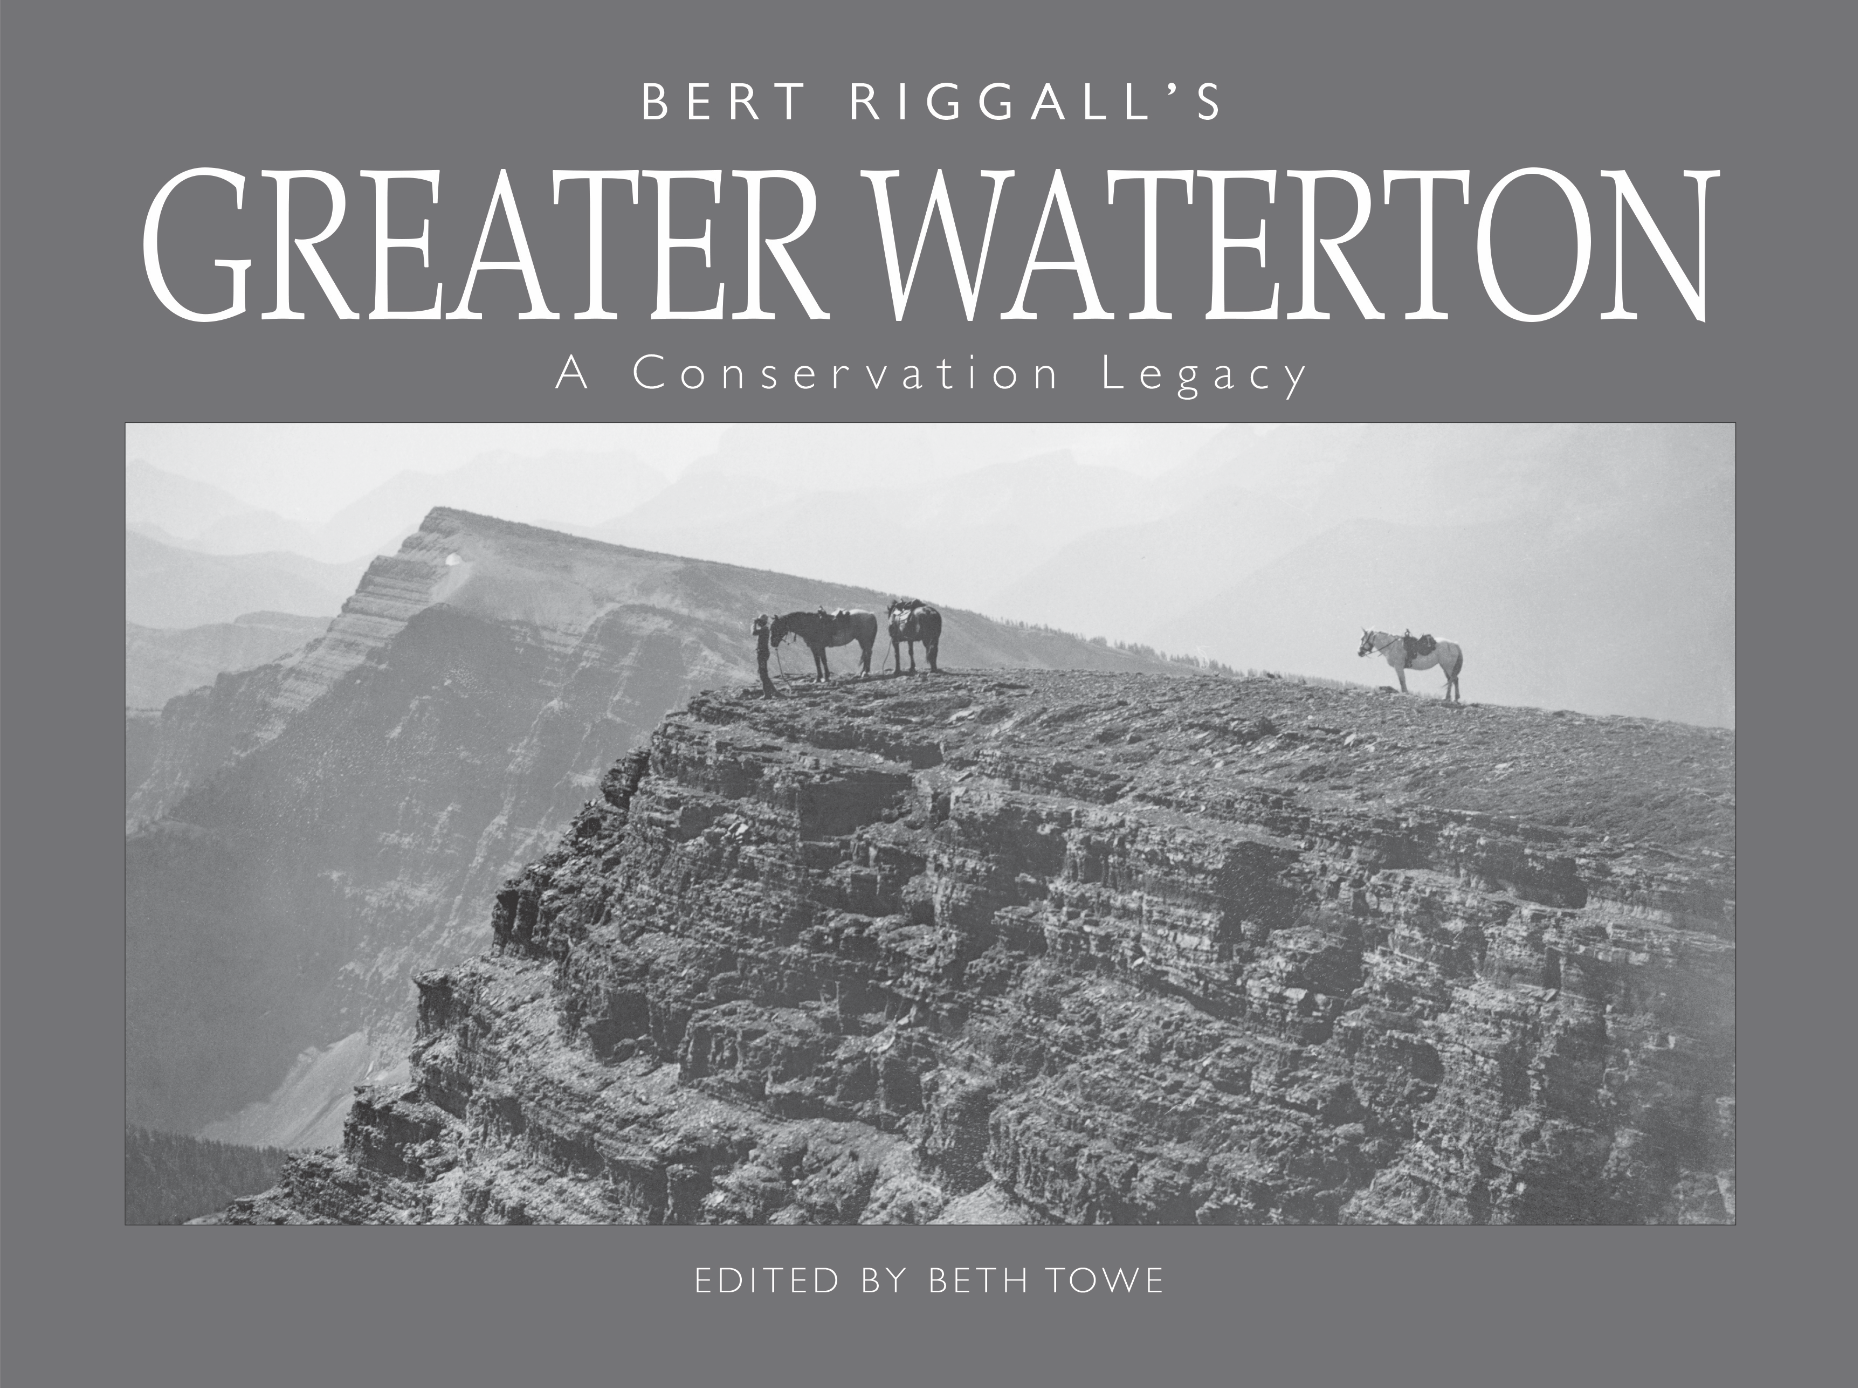 GREATER WATERTON book launch with Fred Stenson, Sid Marty and others | Dec 16, 1-3pm